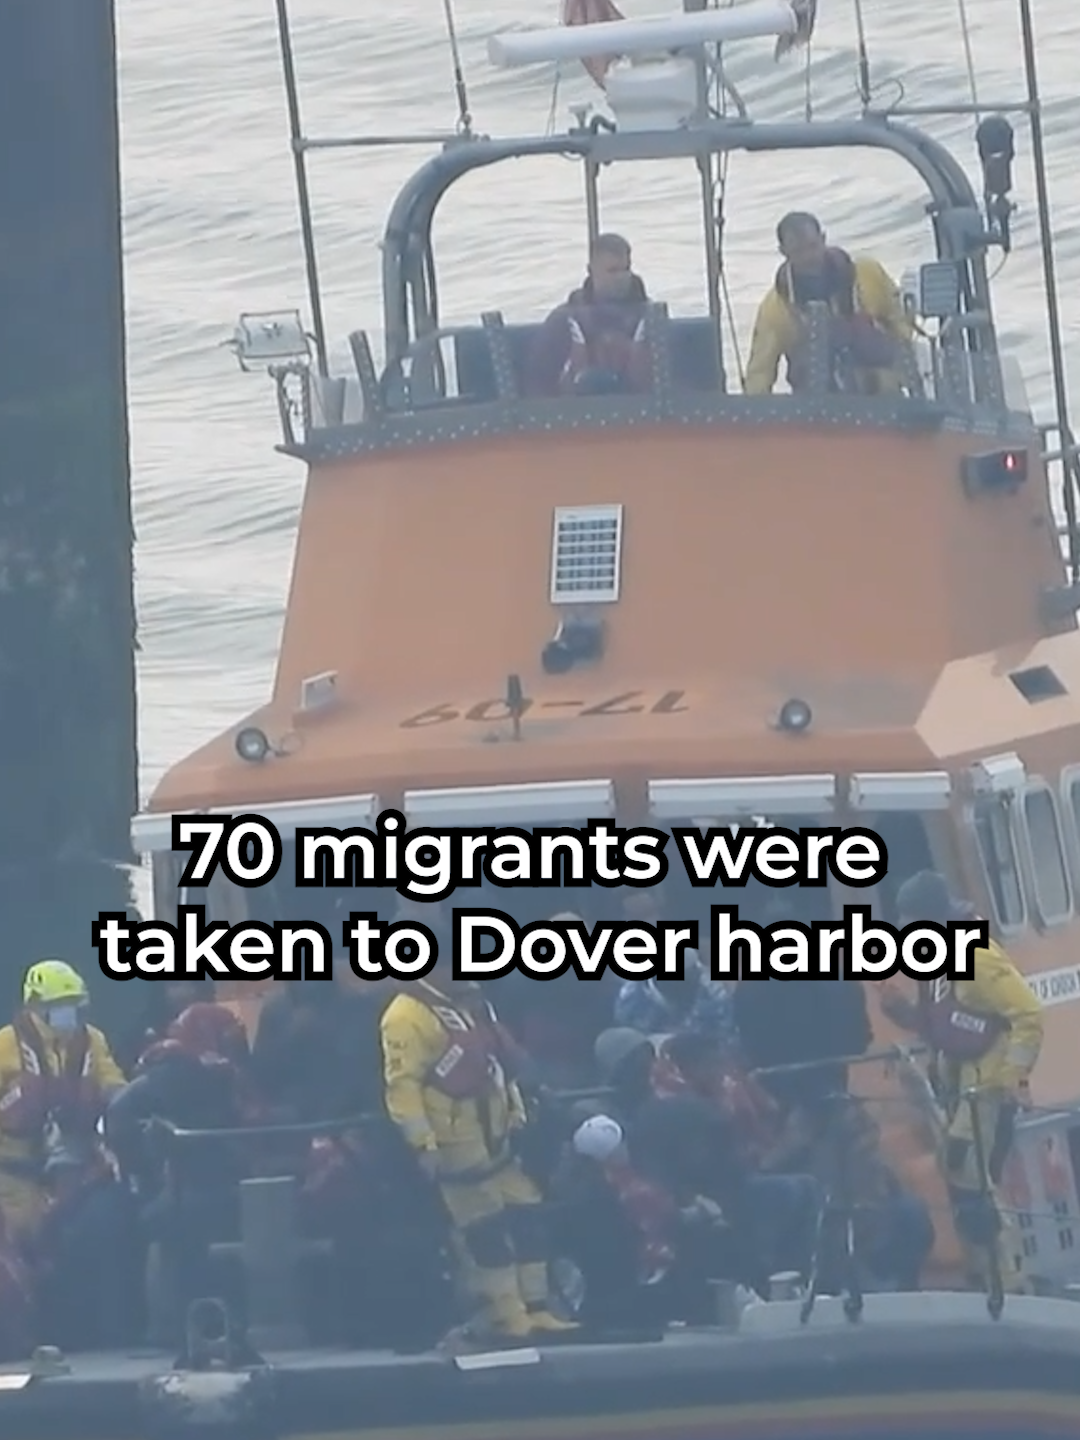 More than 1,500 small boat migrants have crossed the English Channel in just over a week, GB News can reveal, after several more boats were intercepted in UK waters today. A boat load of around 70 migrants were taken to Dover harbor in the early hours this morning. #migrants #uknews #news #britain #brits #englishchannel #gbnews